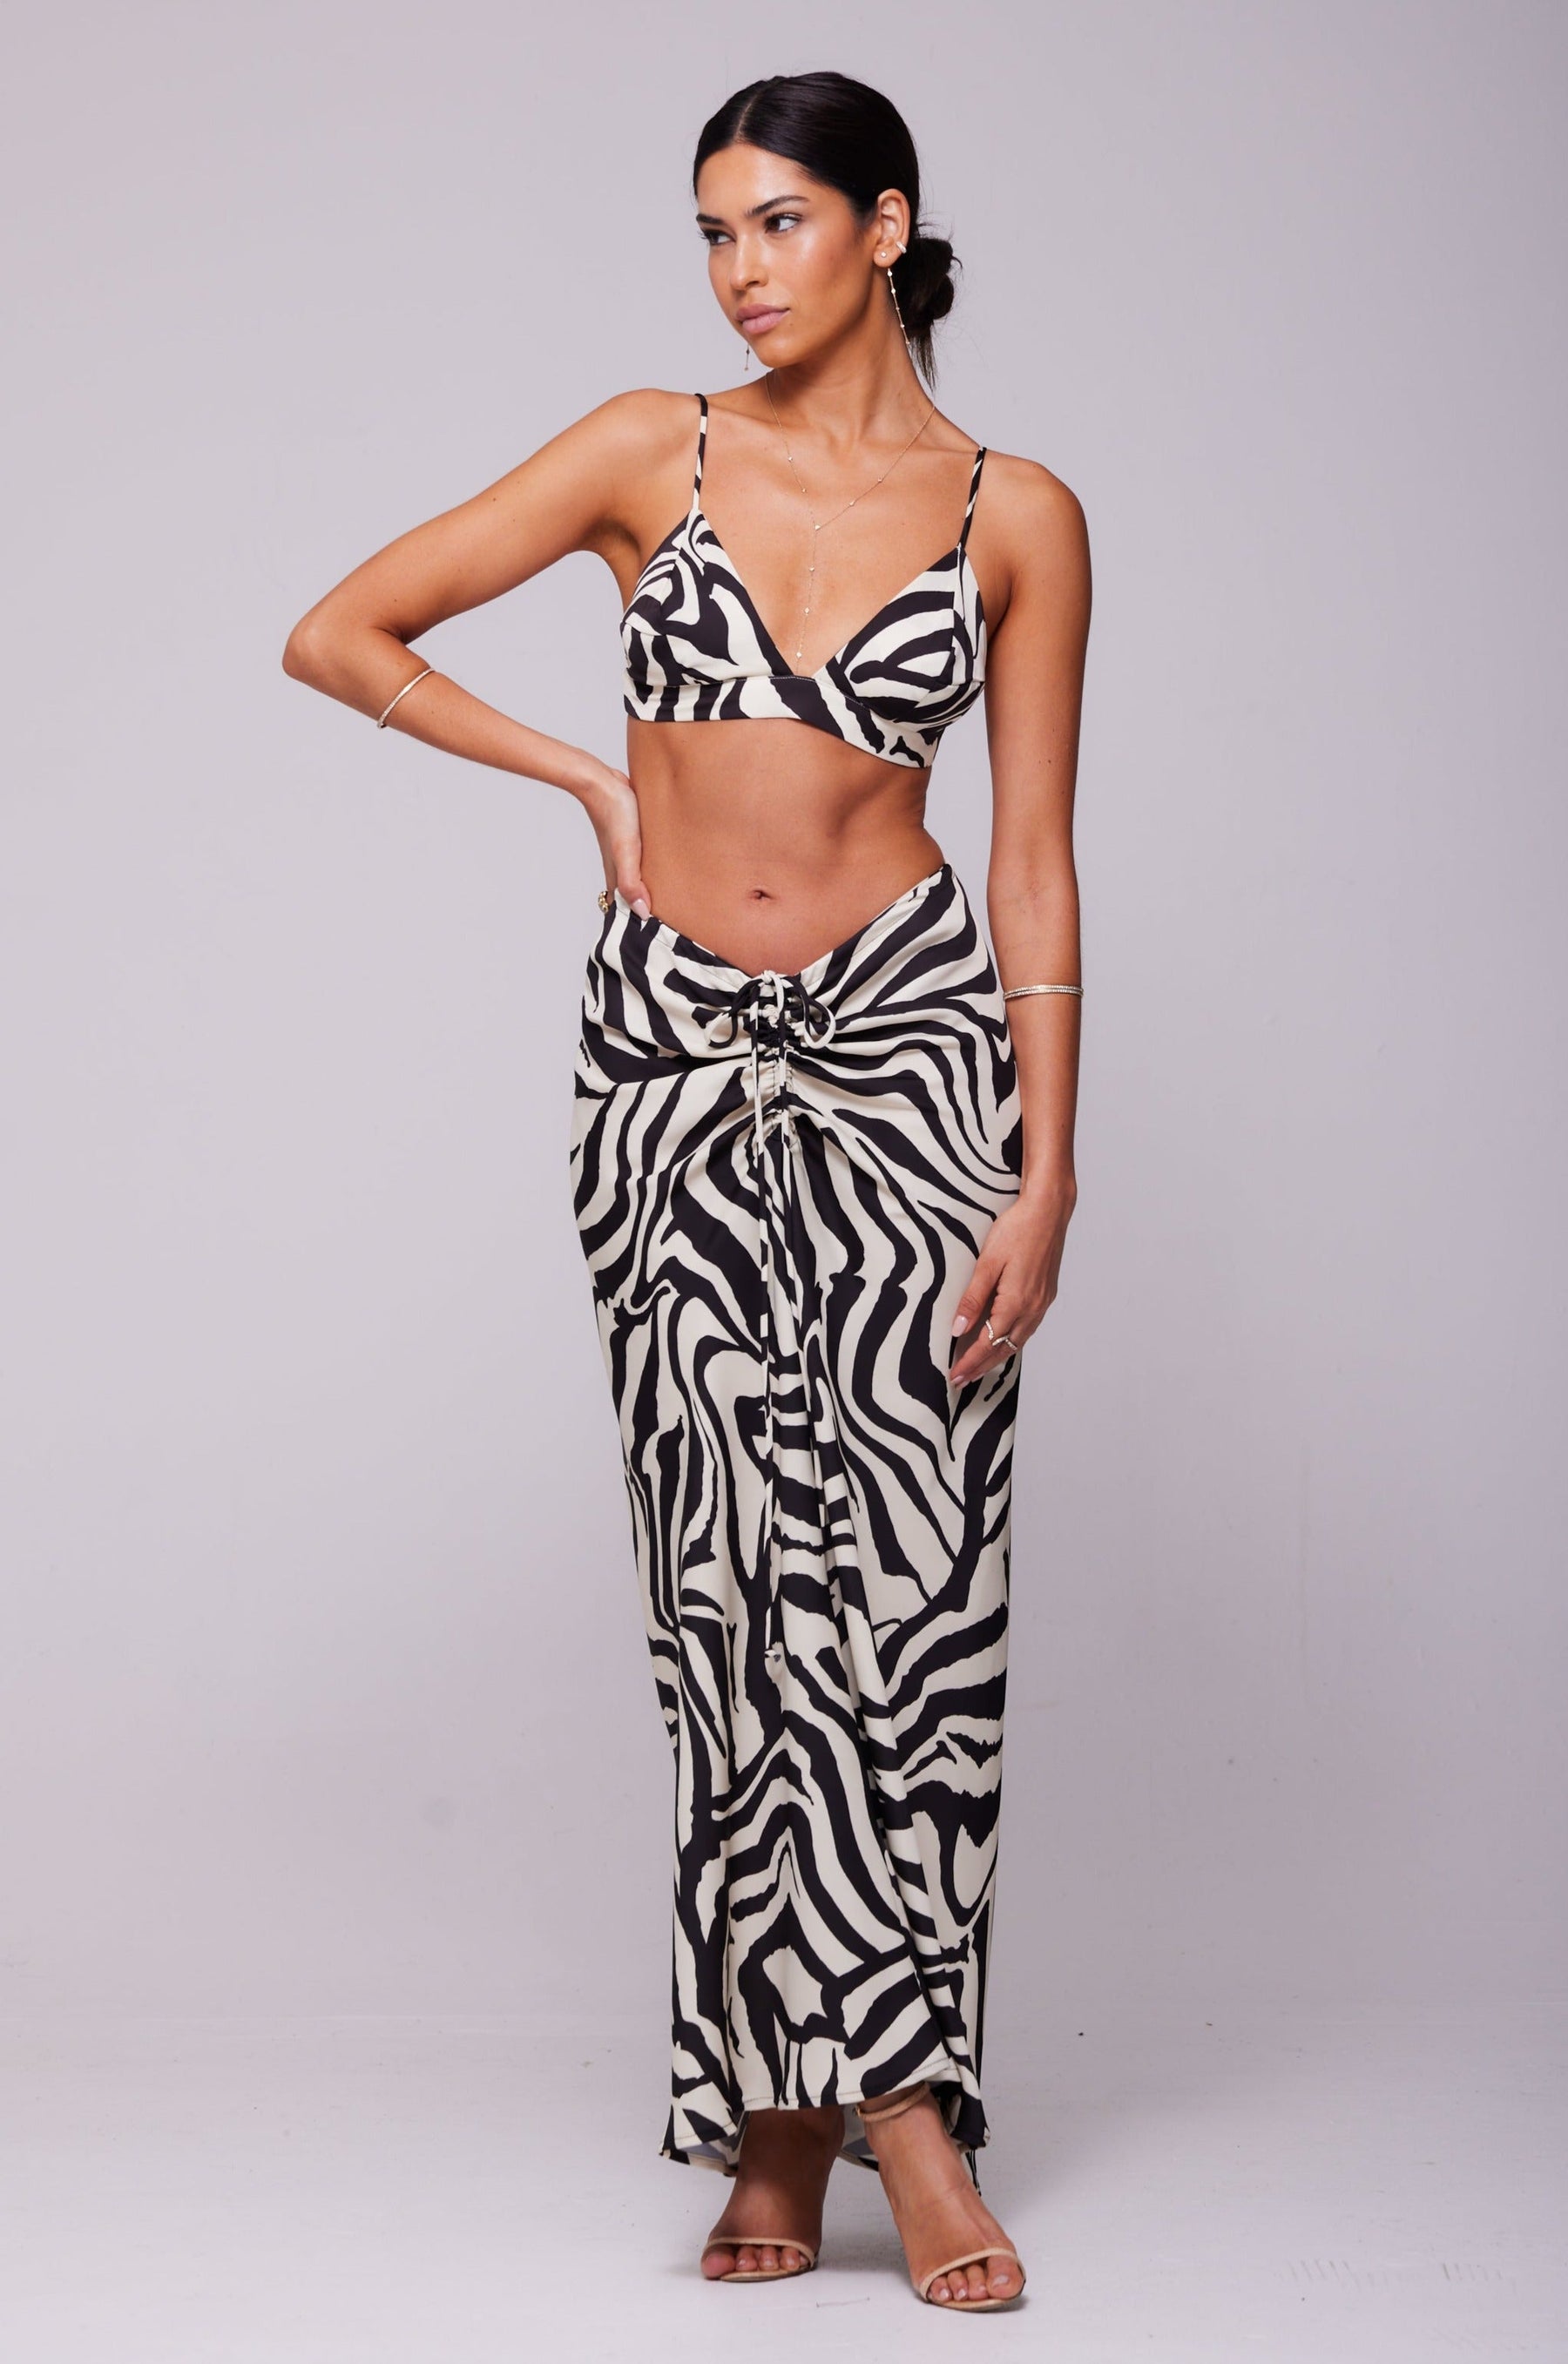 This is an image of Ziggy Skirt in Tigris - RESA featuring a model wearing the dress